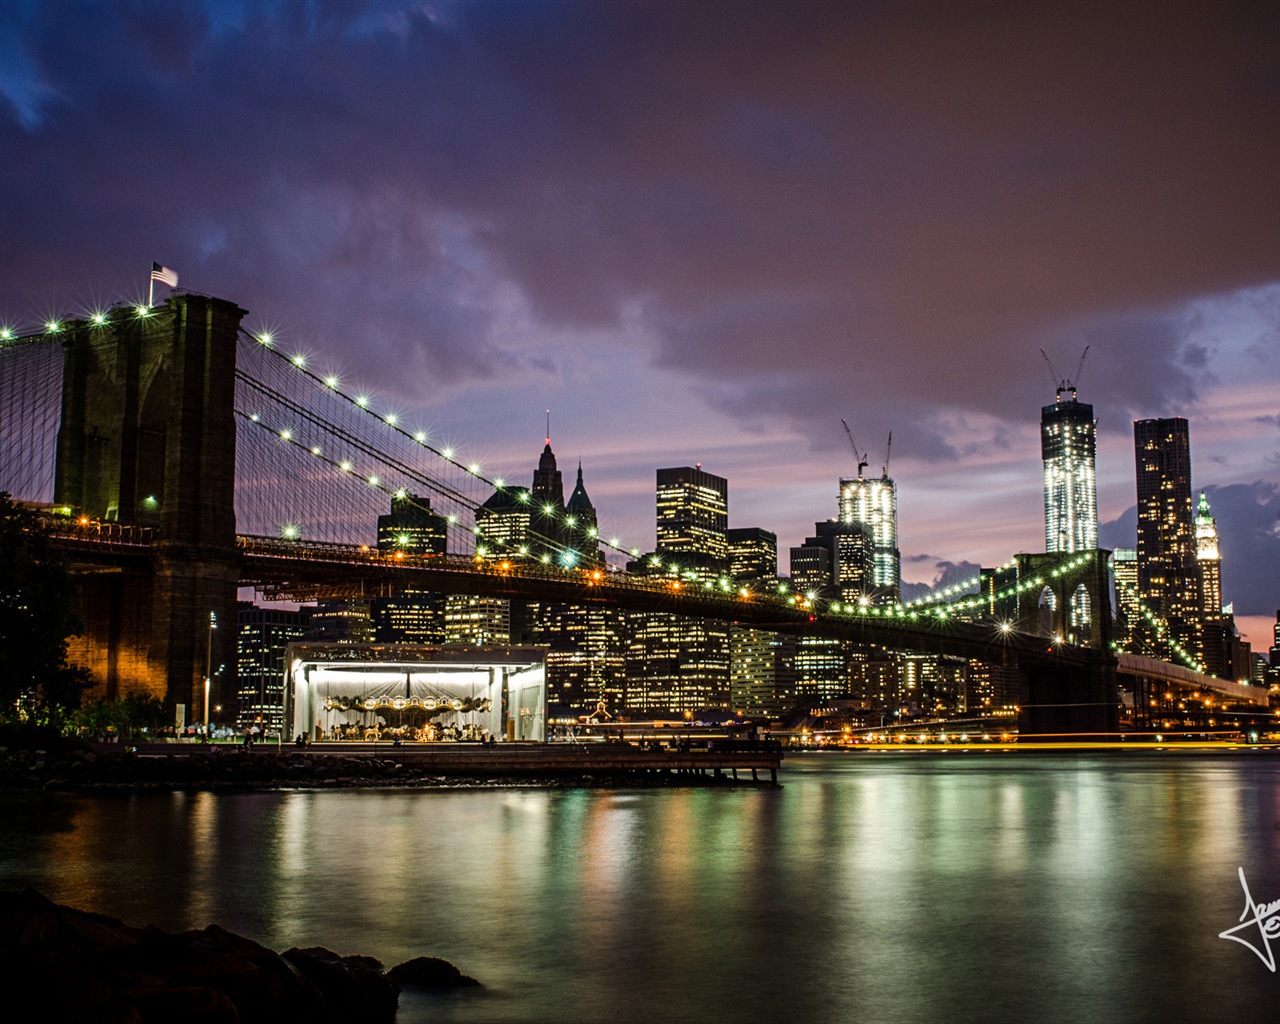 New York cityscapes, Microsoft Windows 8 HD wallpapers #5 - 1280x1024